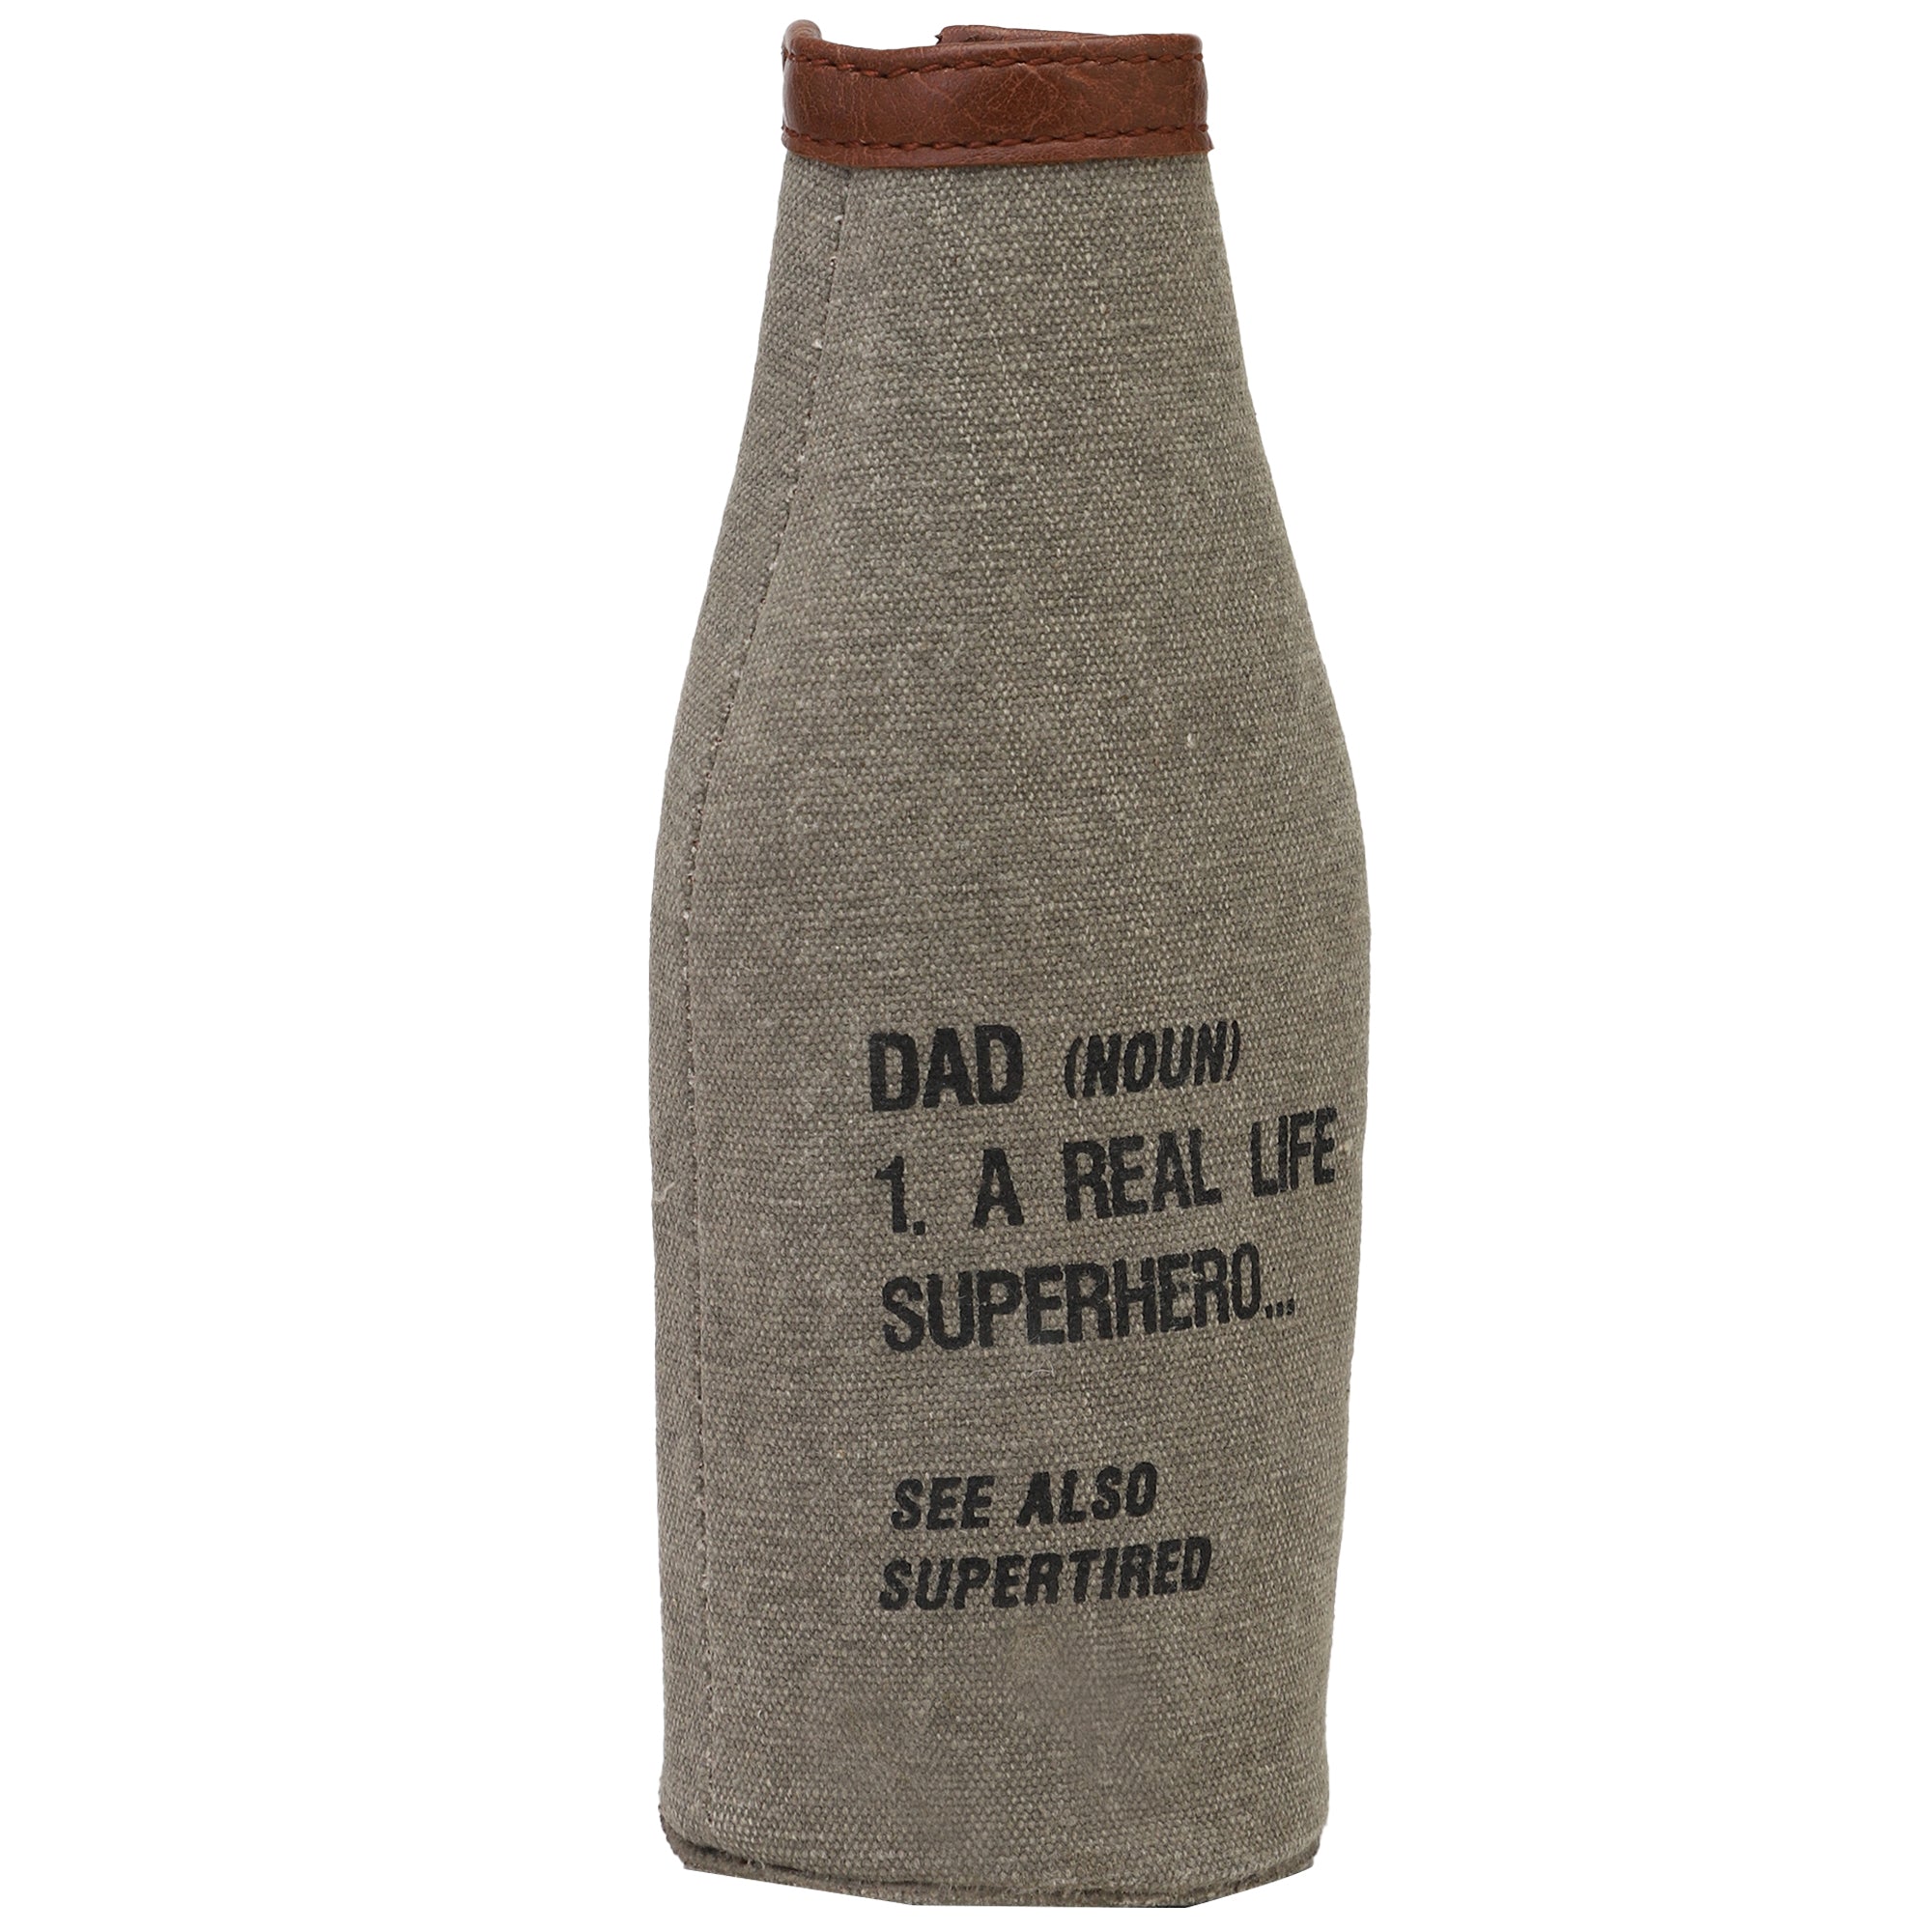 Mona B Pint Beer Bottle Covers with Stylish Printing for Men and Women (SUPER DAD)